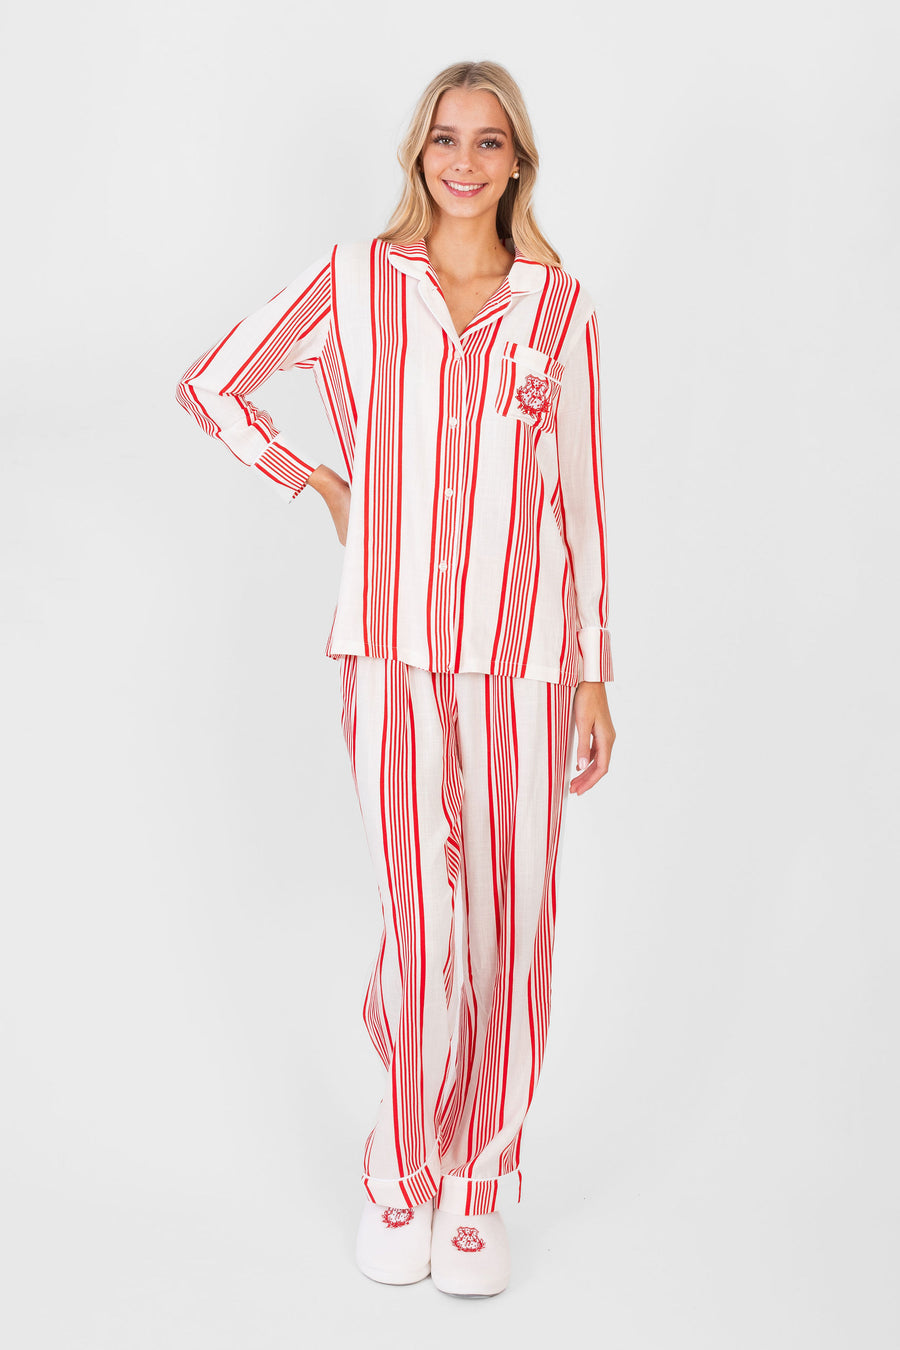 Pajama Set Bright Red Stripe Long *Limited*Edition*